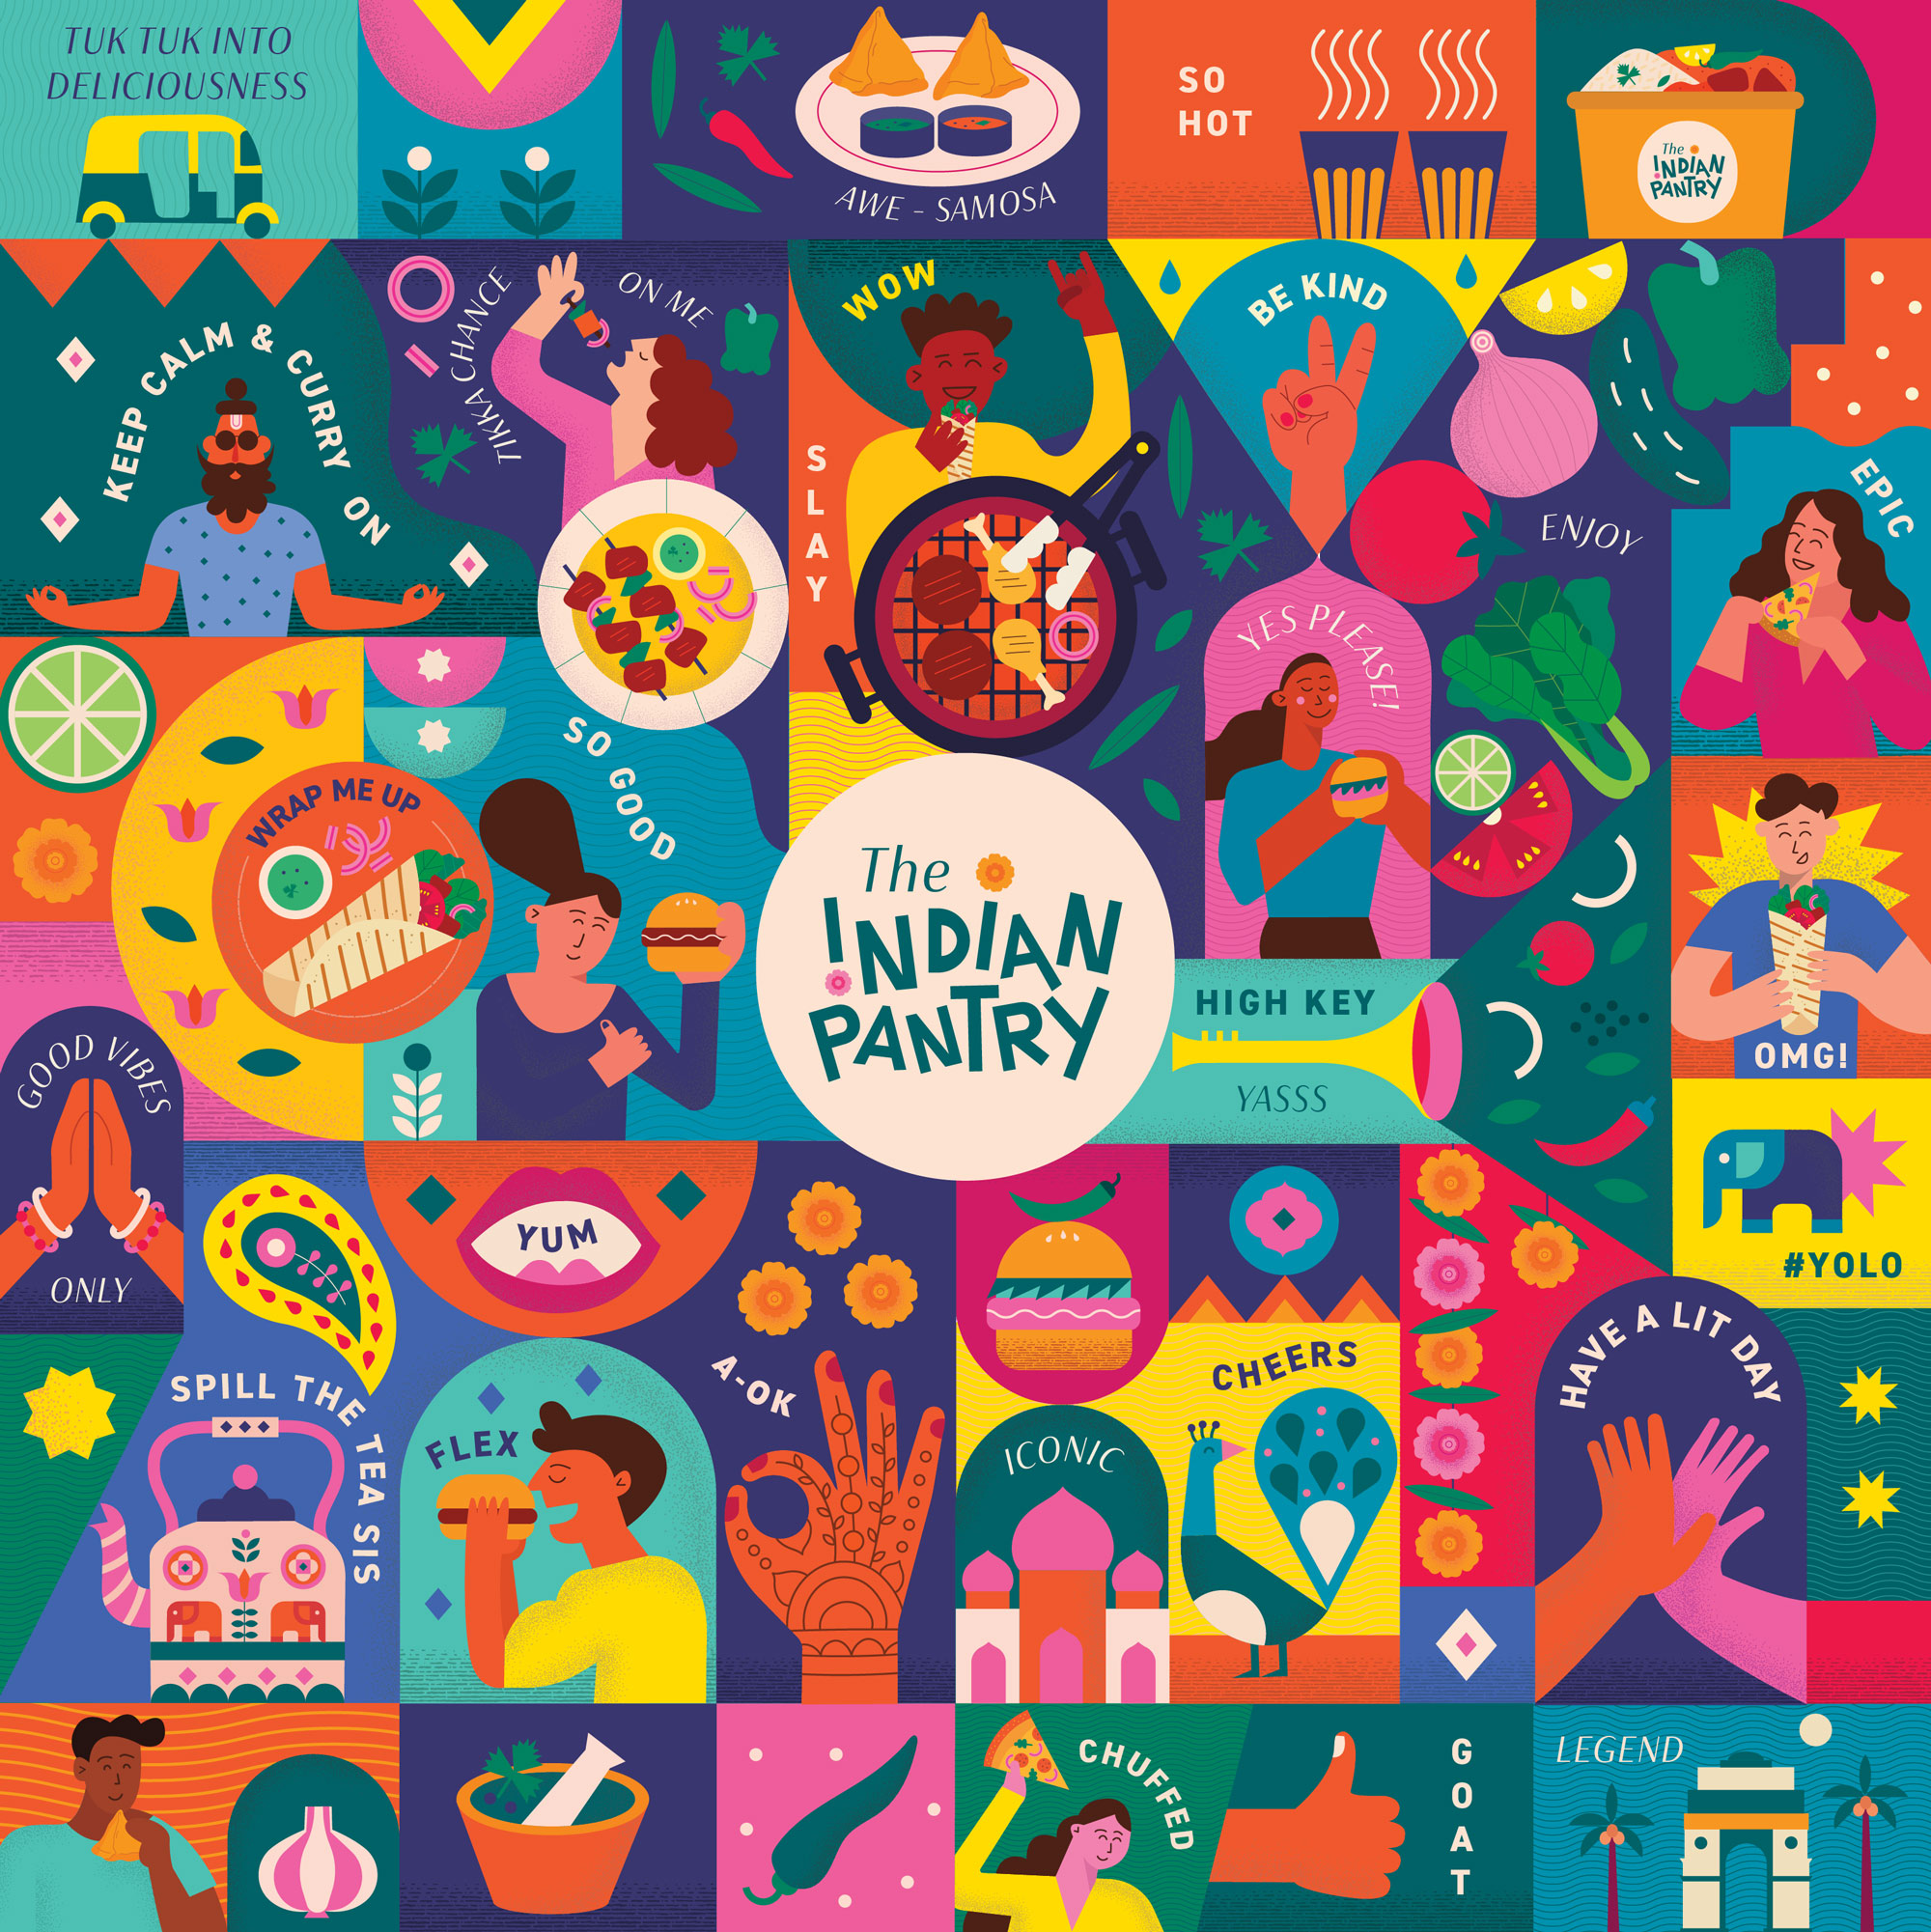 Branding and Packaging Design for The Indian Pantry